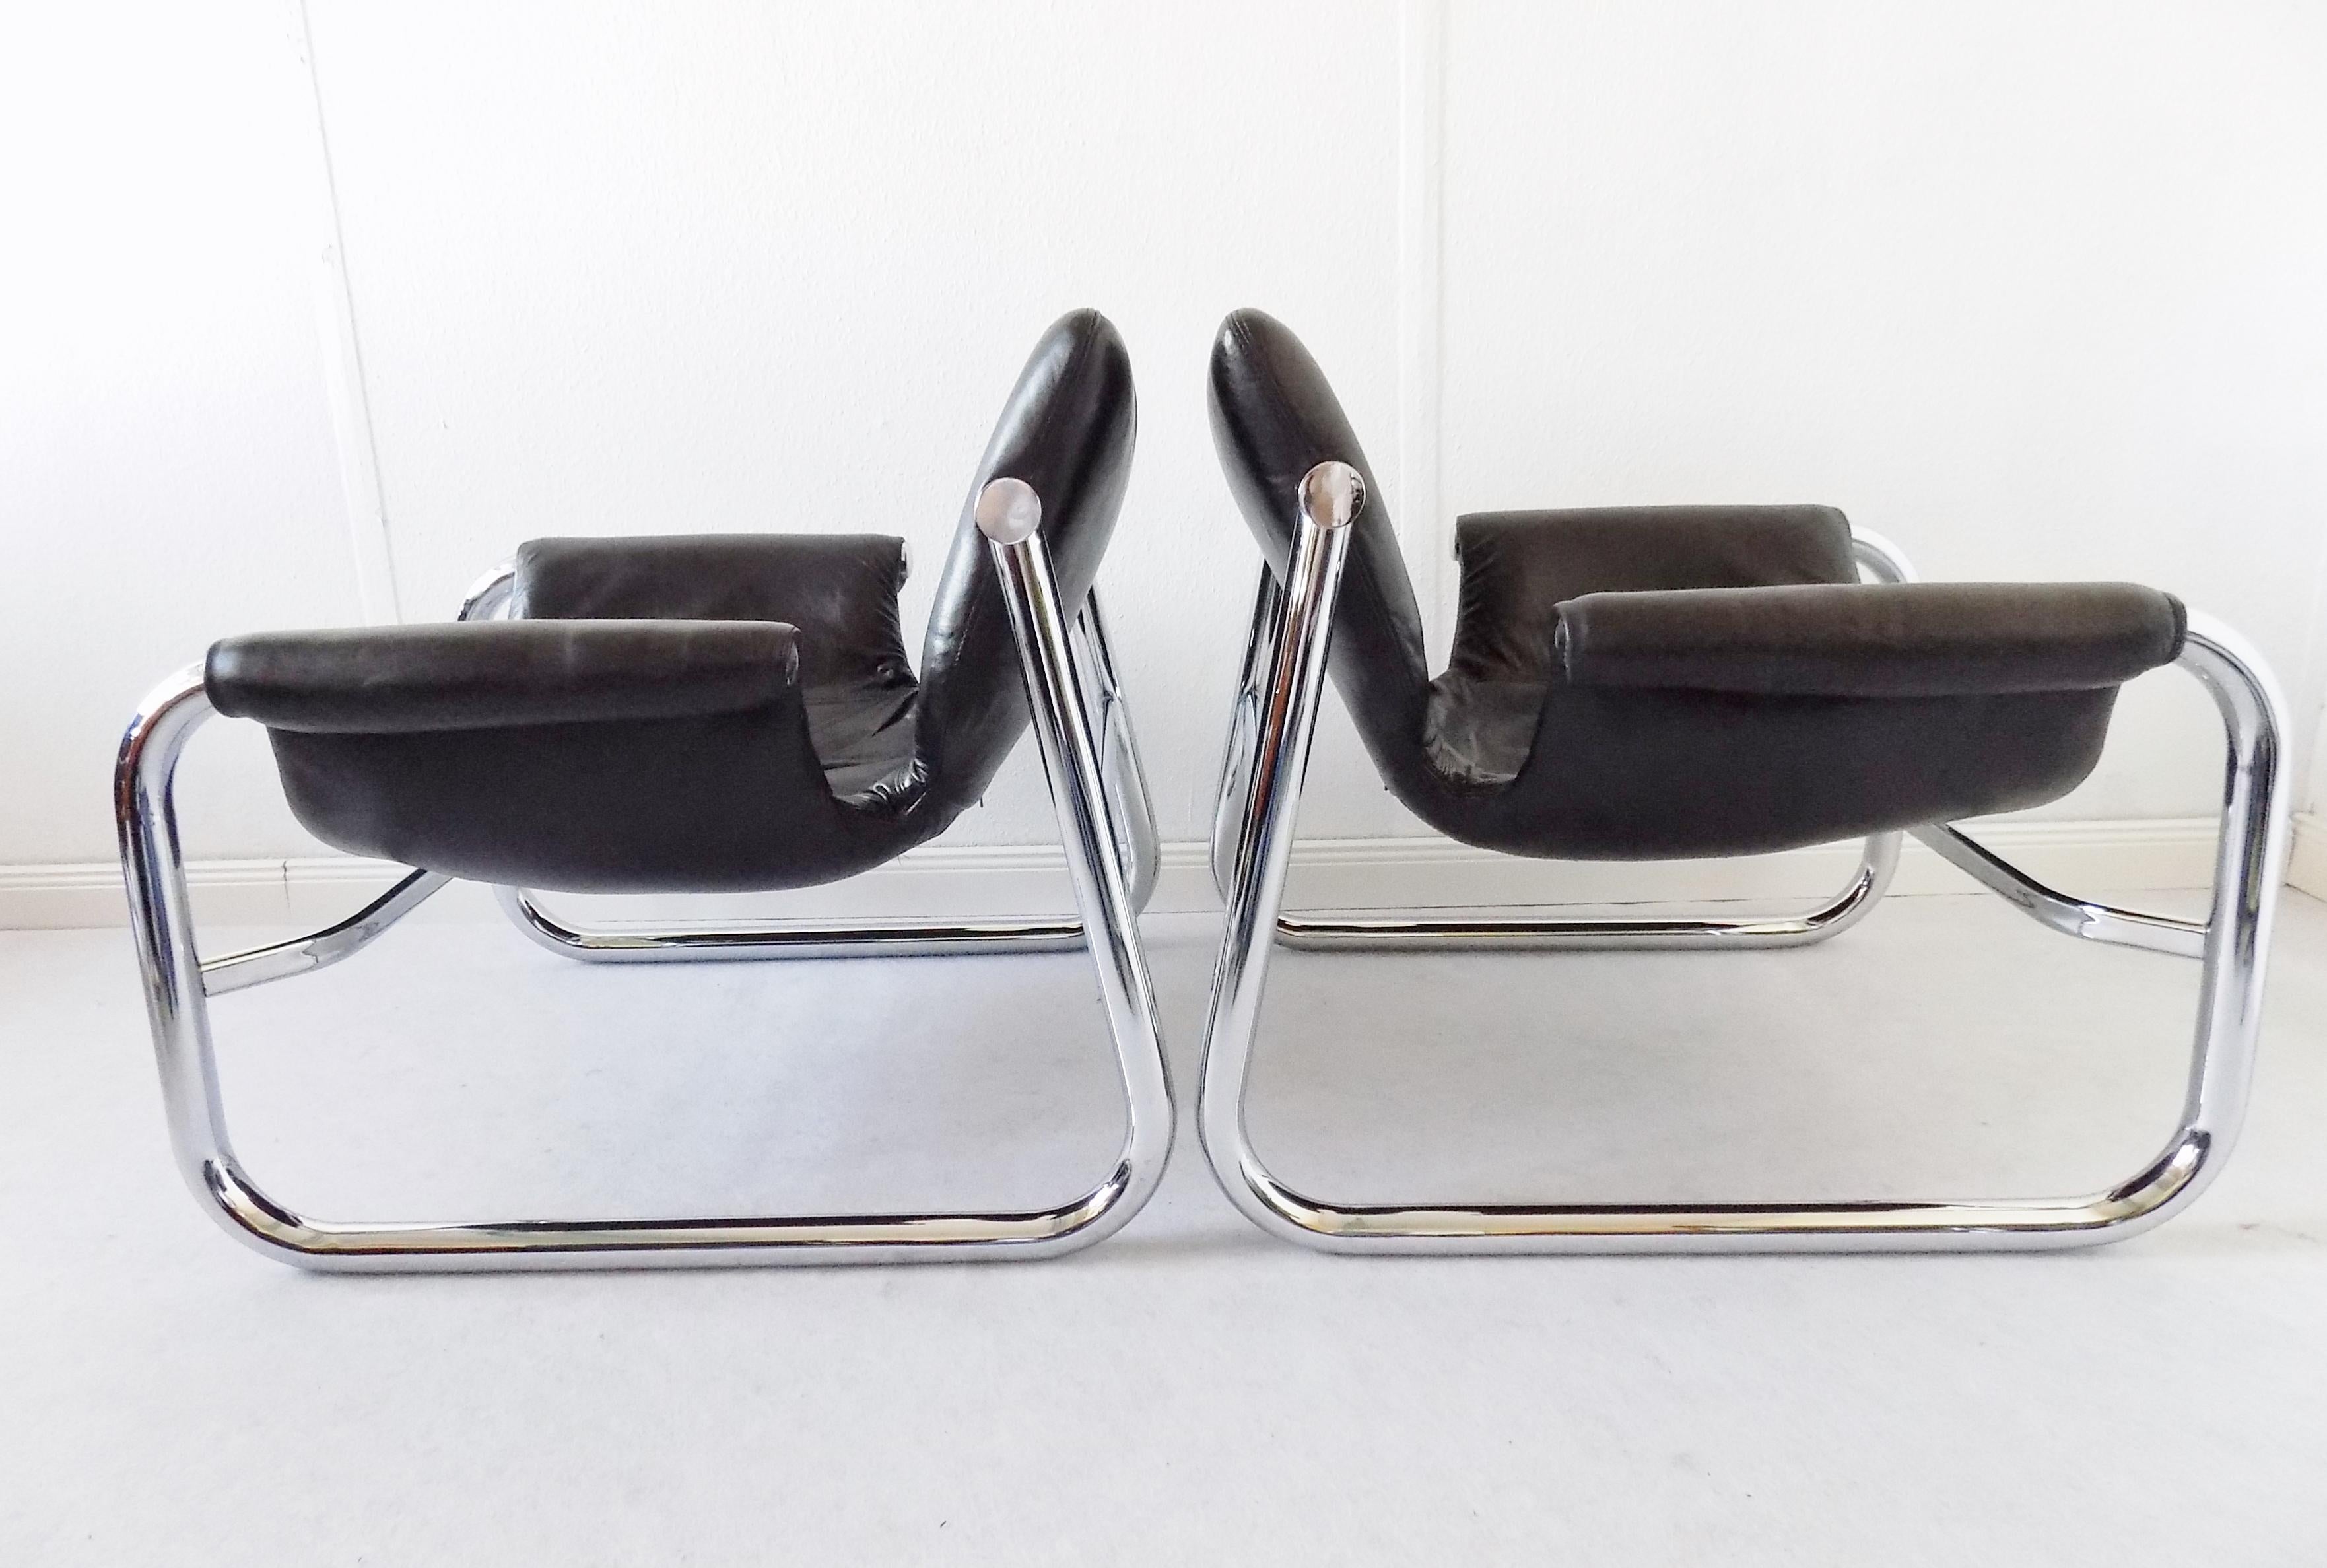 Alpha sling leather chairs by Maurice Burke for Pozza, Mid-Century Modern, black

Two alpha sling leather chairs in an extraordinary condition. The black leather is without any damages and the tubular chrome frame is shiny as new. The leather is